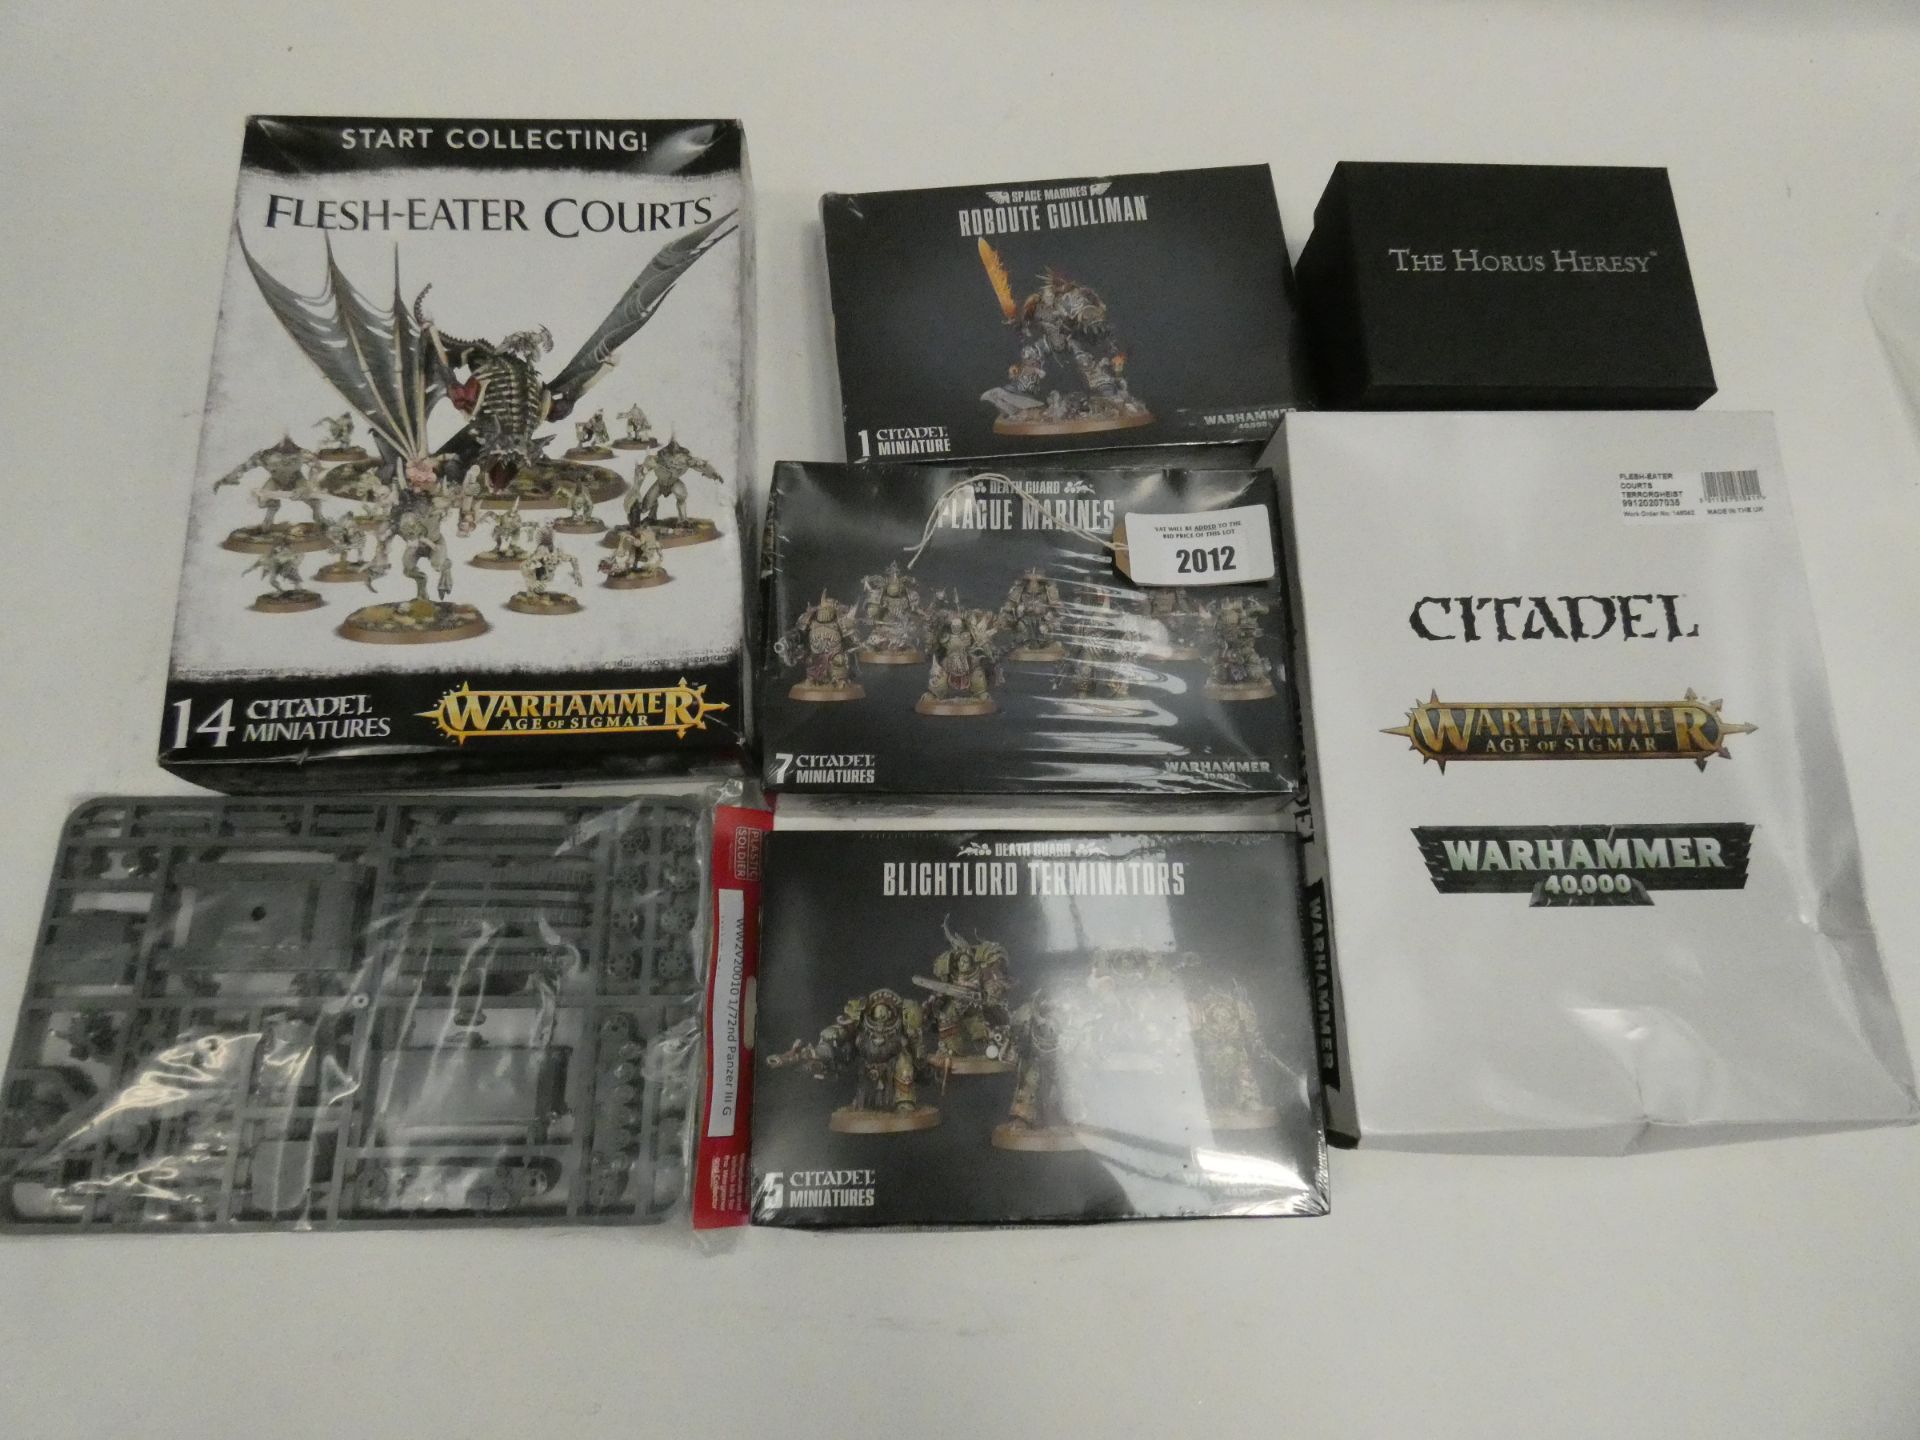 Bag containing quantity of various Warhammer sets